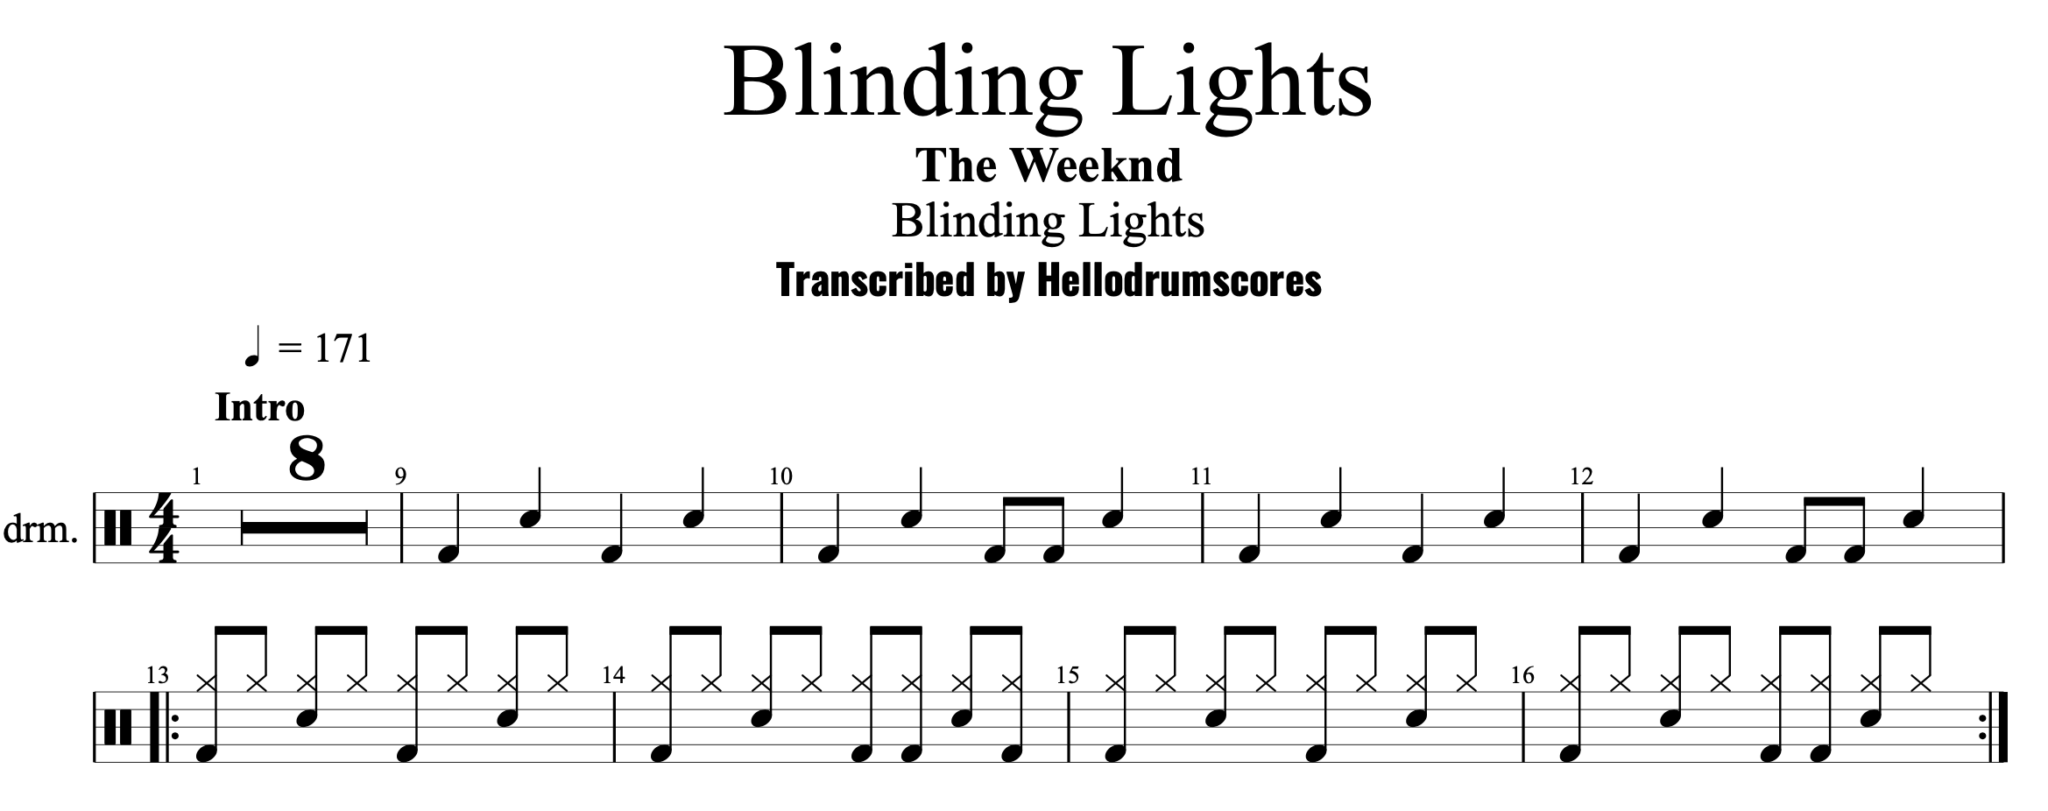 Blinding lights the weeknd текст. Blinding Lights Ноты. Blinding Lights Ноты для фортепиано. Blinding Lights the Weeknd Ноты. Барабанные Ноты the Weeknd.